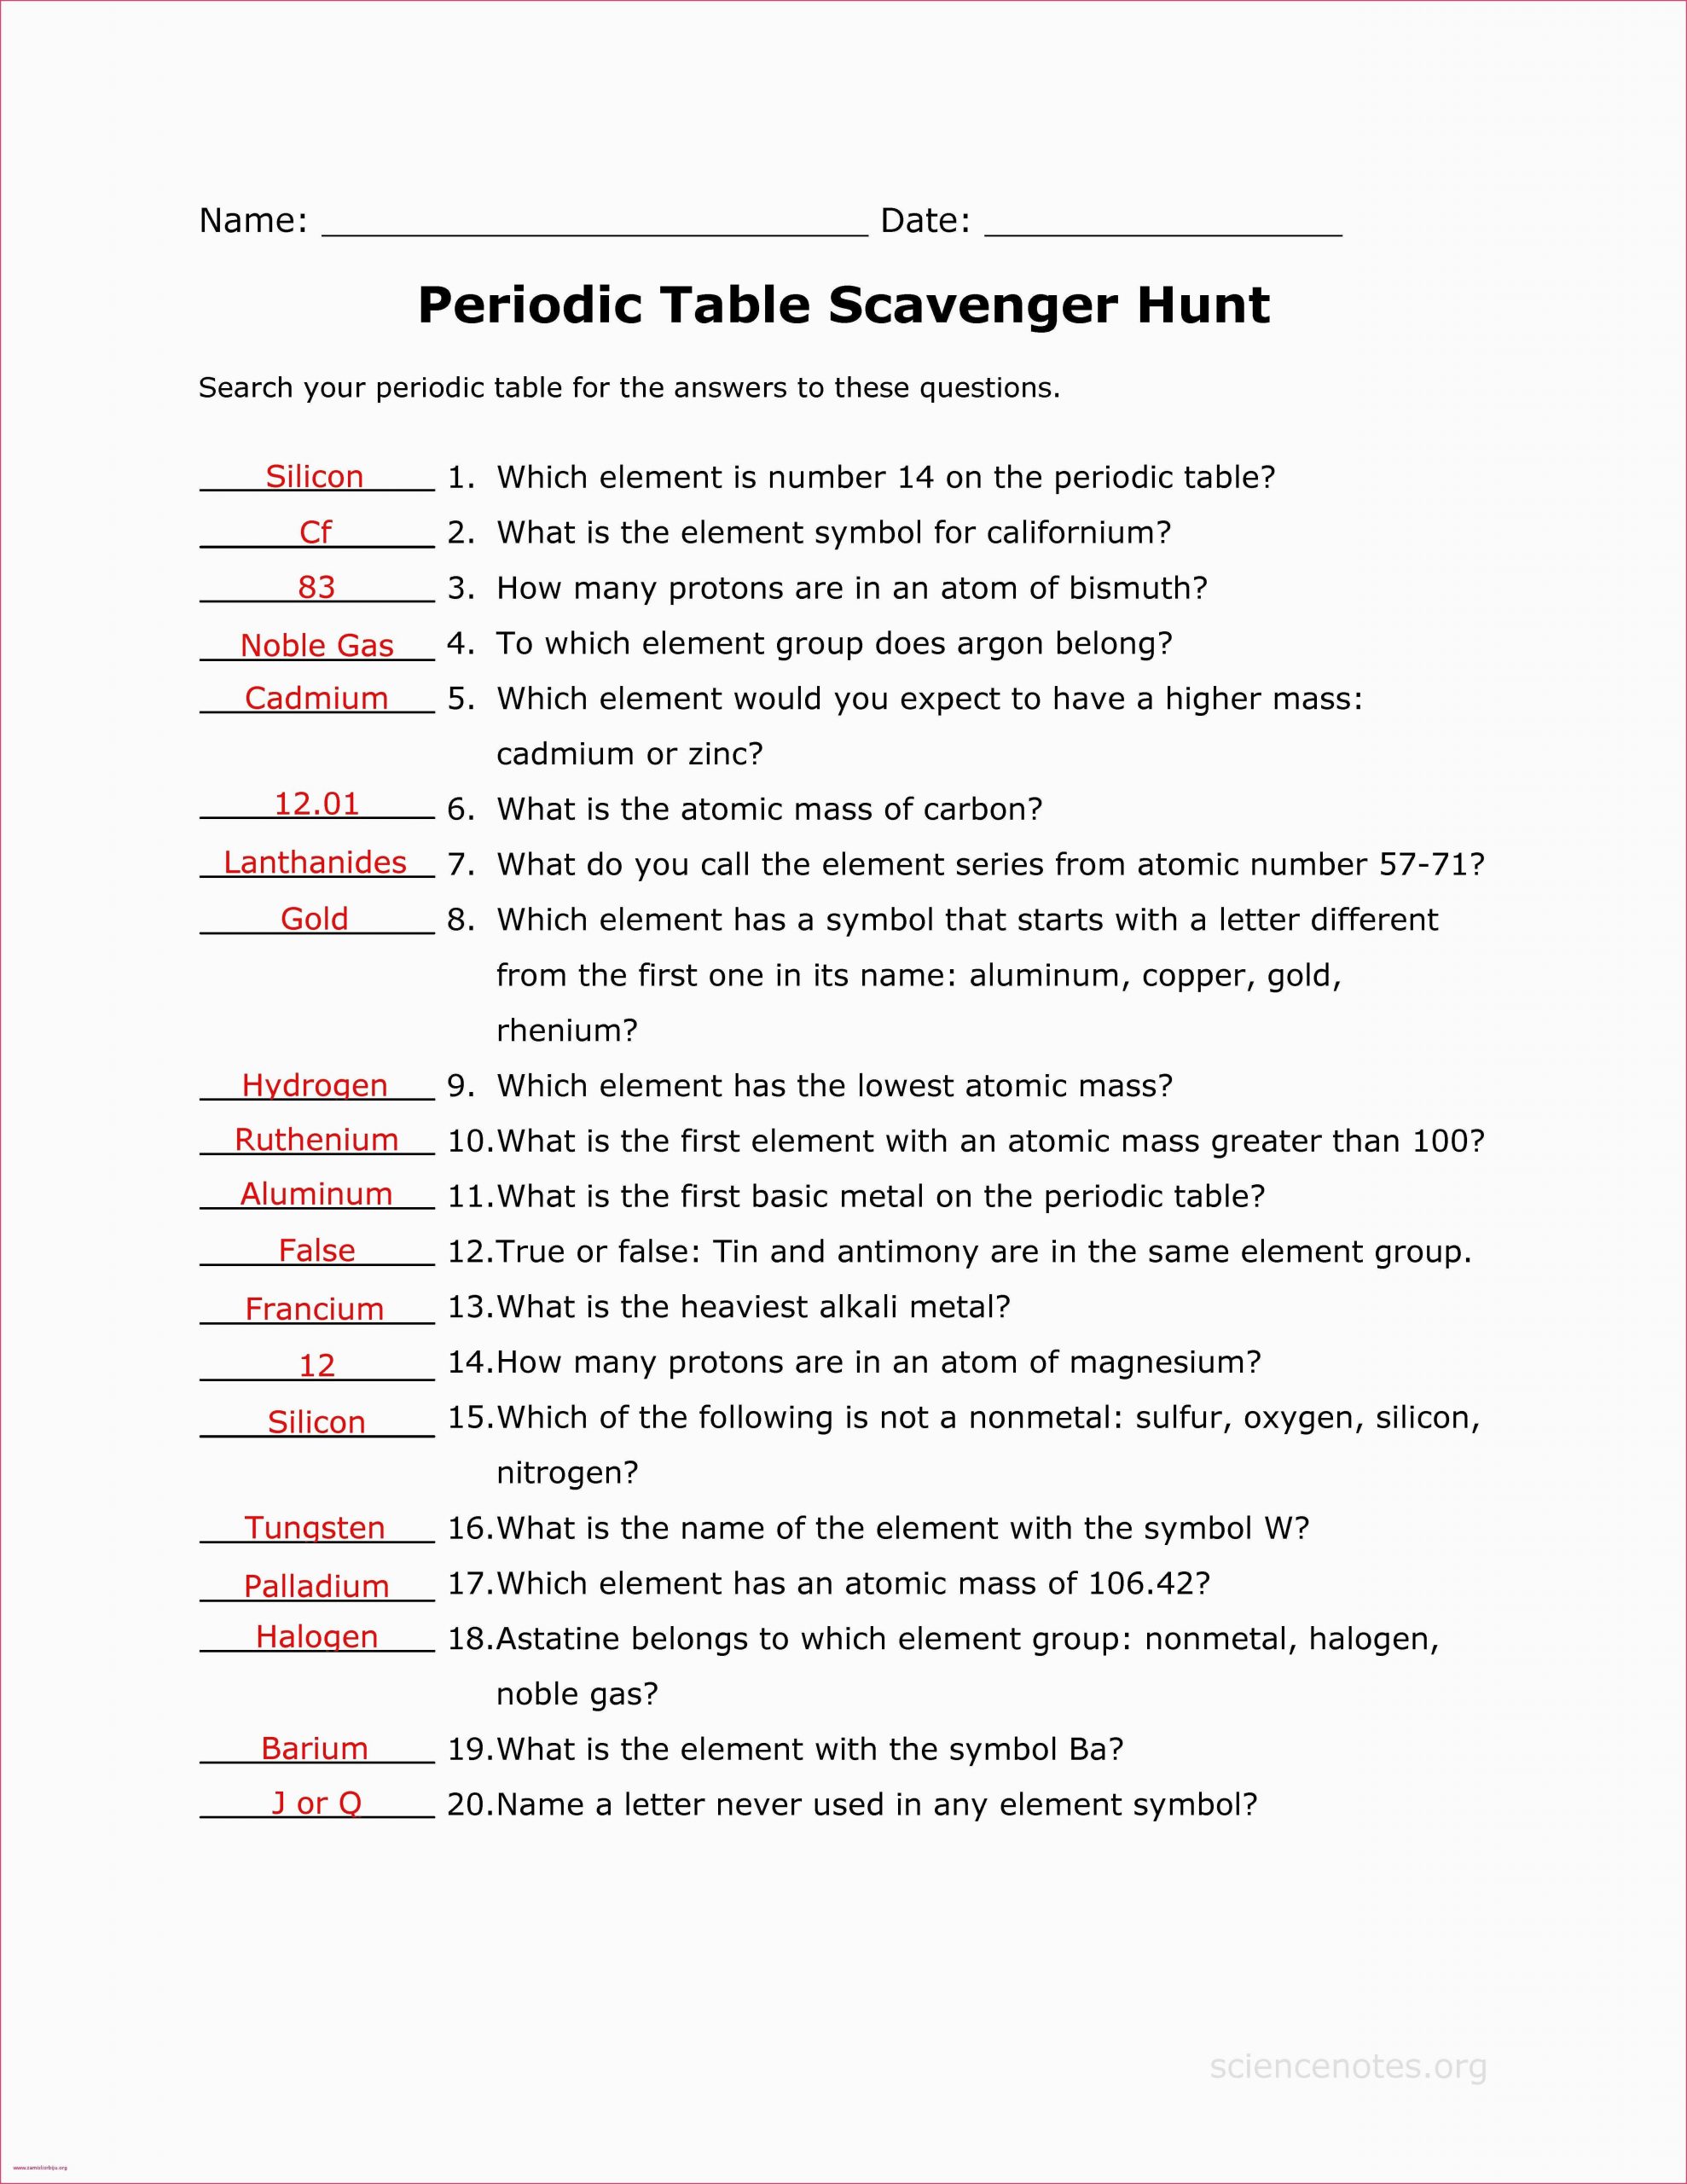 Periodic Table Scavenger Hunt Worksheet You Can Download Best Periodic Table with Mass at Here